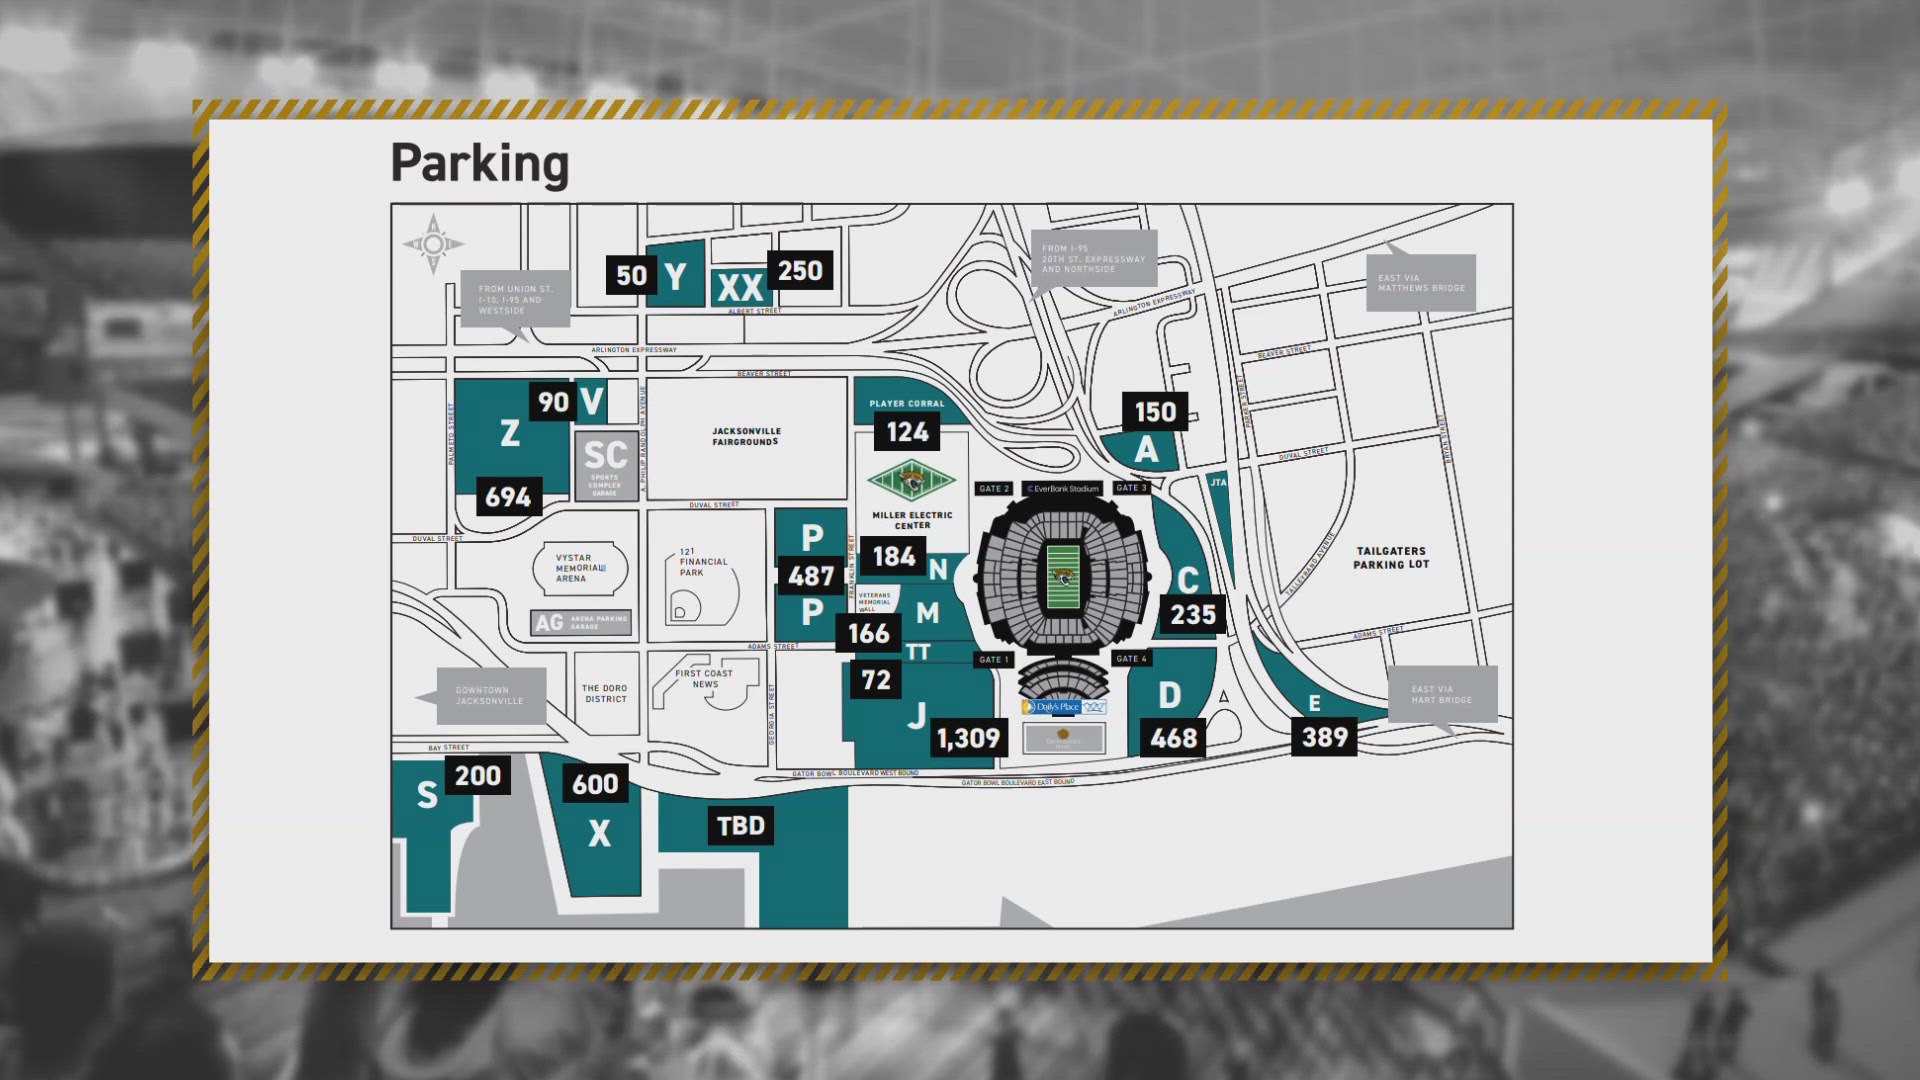 Parking options are subject to change due to pending negotiations among the Downtown Investment Authority, mayor's office and city council.